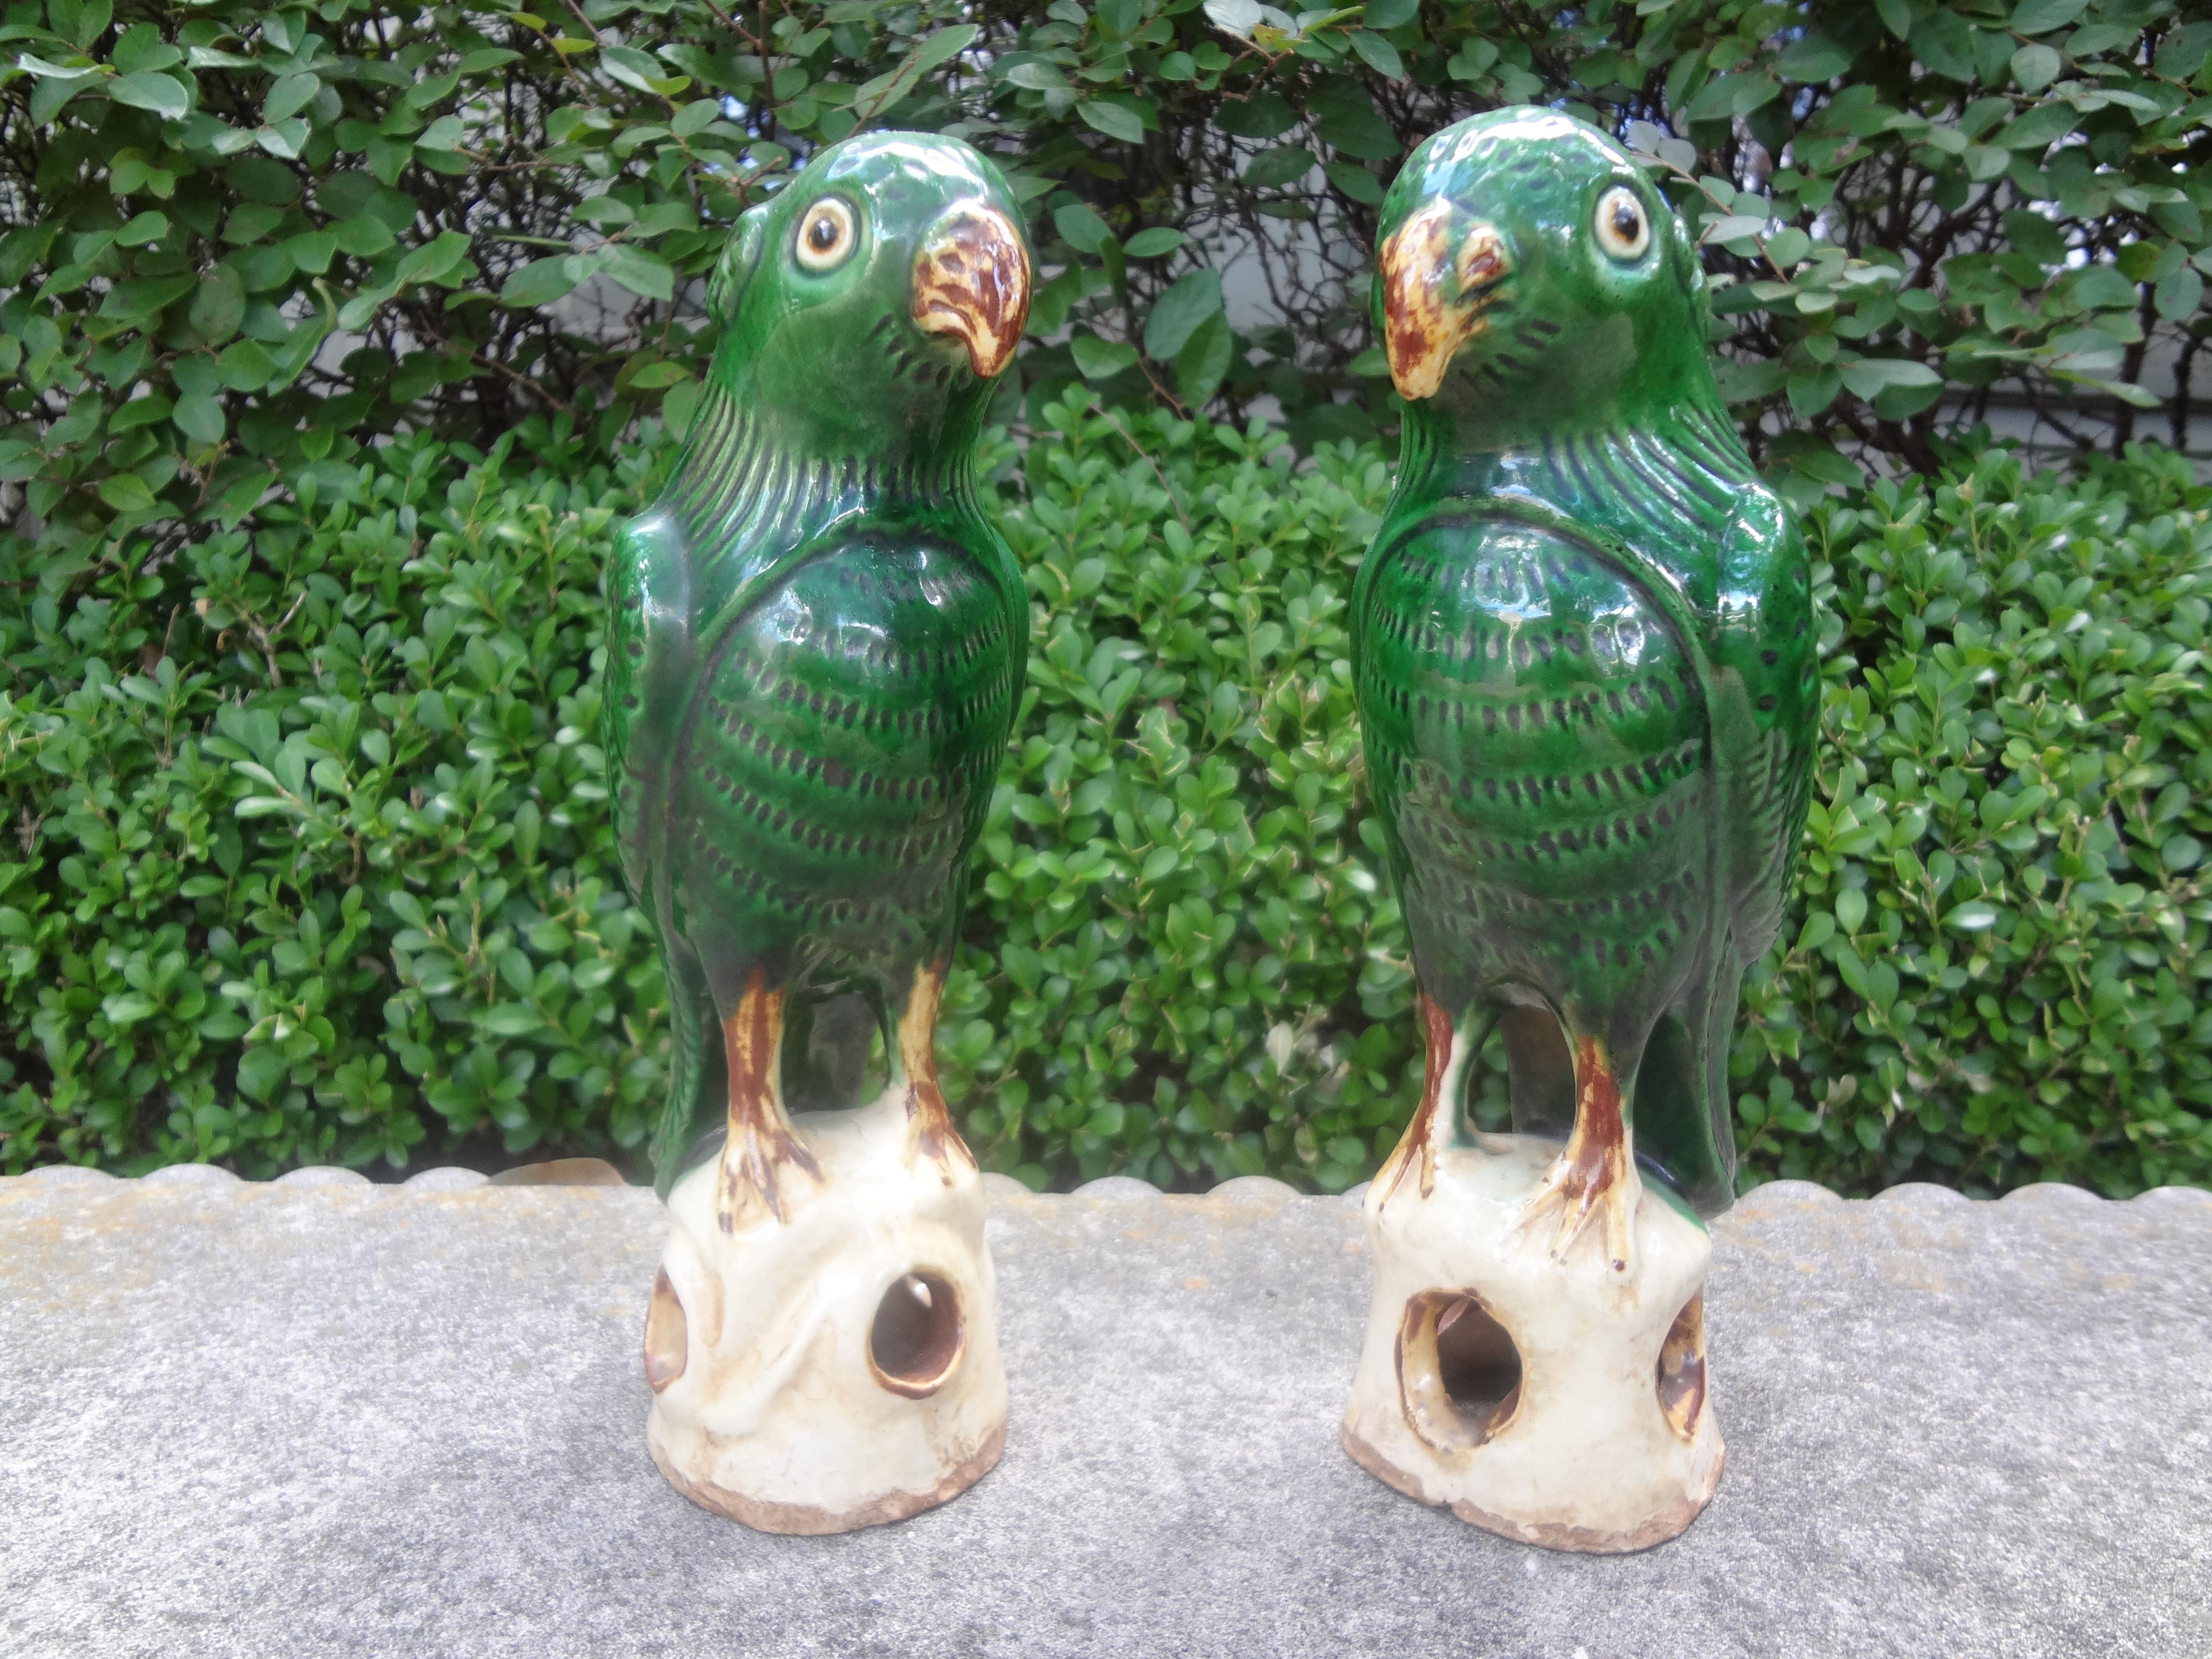 Great pair of Chinese export glazed pottery or clay birds or parrots, circa. 1900. This charming pair of Chinese parrot figures are heavy, well made and executed in a beautiful shade of green. Our parrots are in great condition and would make a